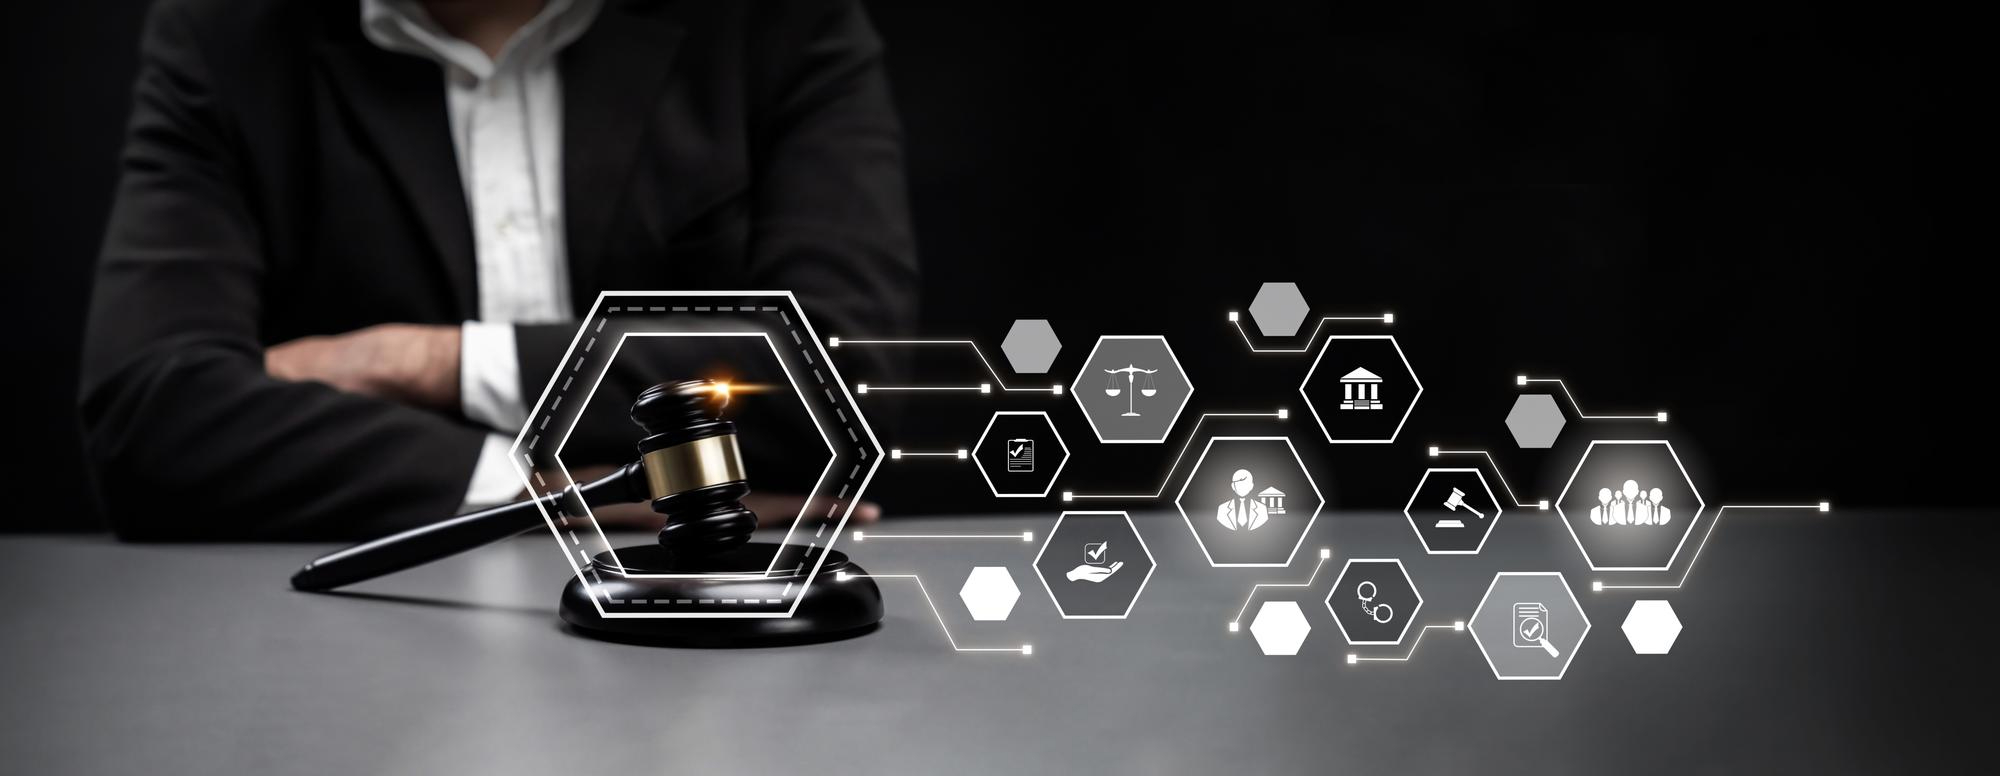 Co Partners | Digital Transformation Leads to Radical Changes in the Field of Law